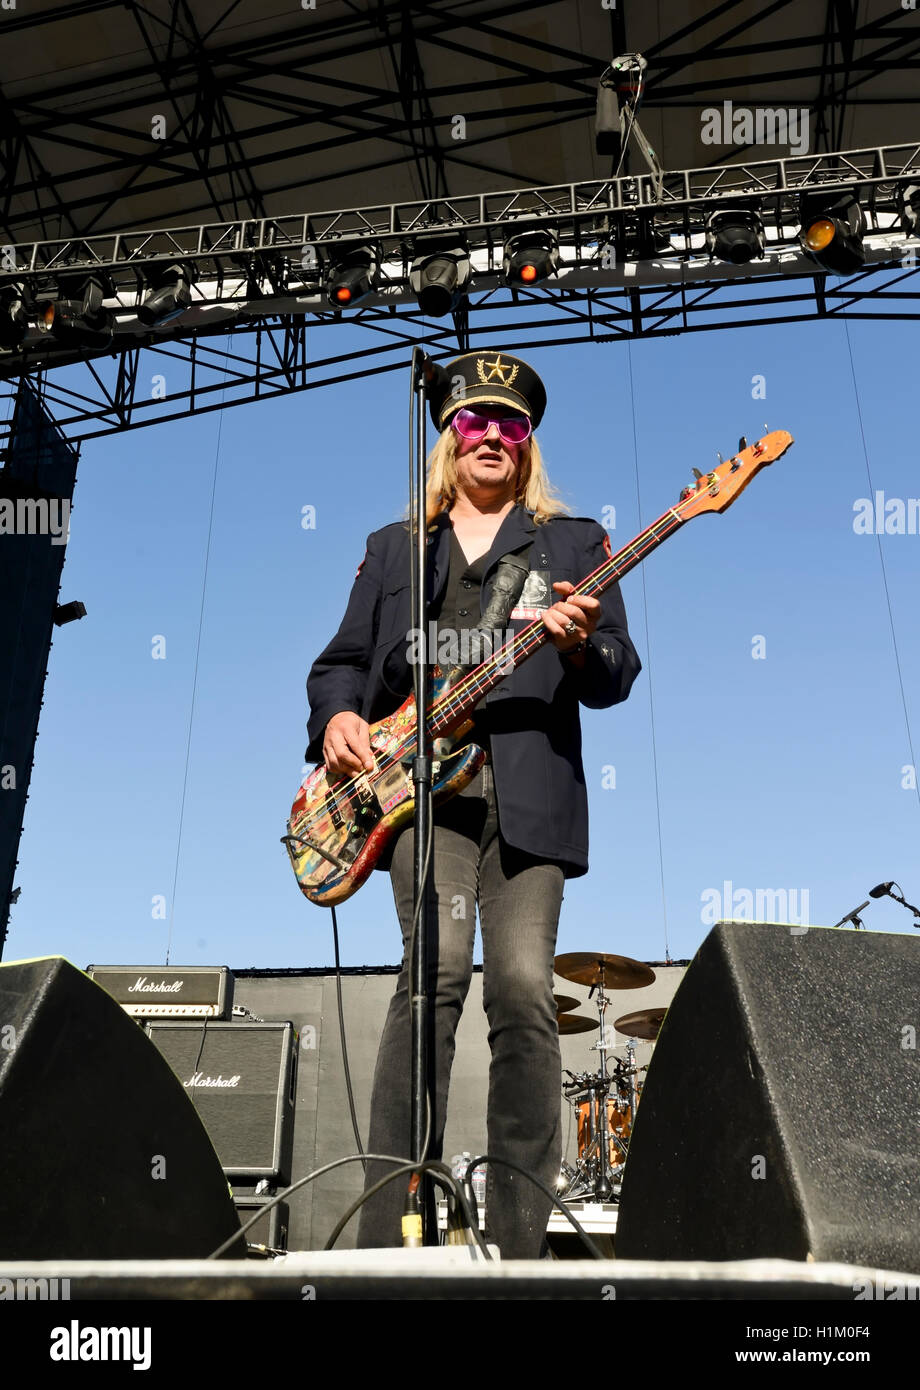 September 17, 2016, Irvine California, Chip Z'Nuff of the band Enuff Z'Nuff on stage at the Sirius XM Hair Nation Fest Stock Photo